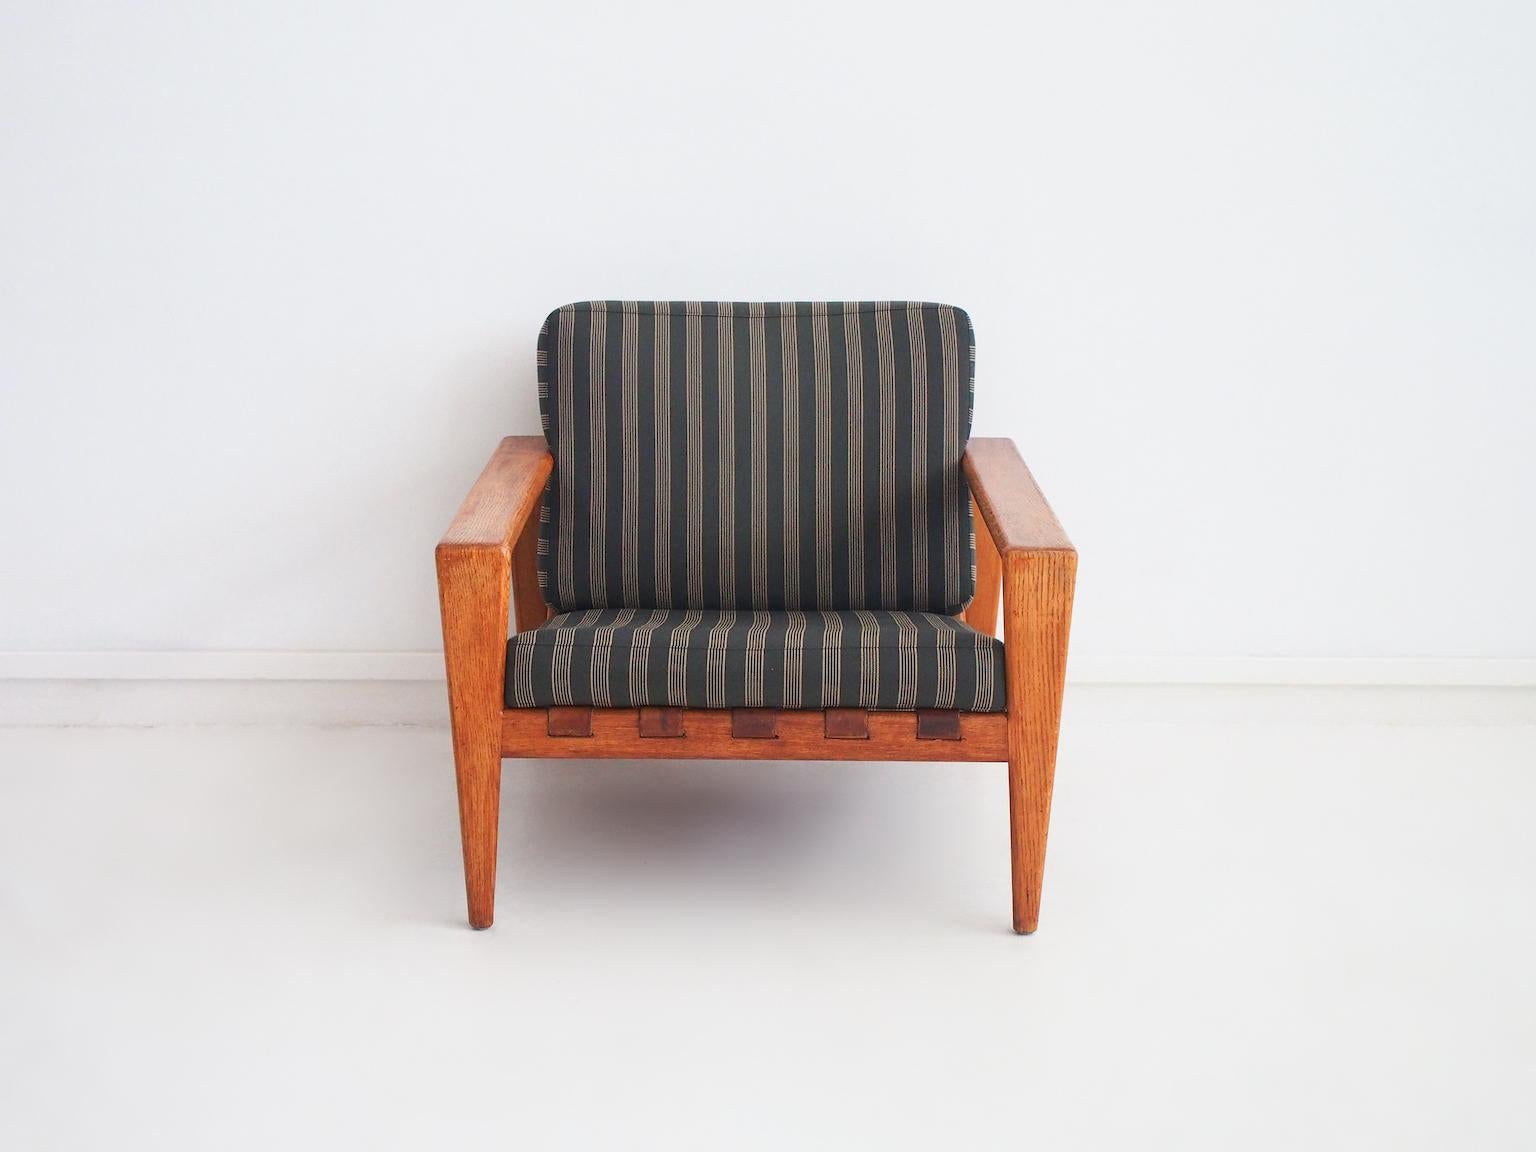 Lounge chair, model Bodö, designed in 1957 by Svante Skogh. Made by AB Hjertquist & Co in Nässjö, Sweden. Frame in oak, leather saddle seat, recently reupholstered cushions. This armchair with its clean lines is a good example of an ageless